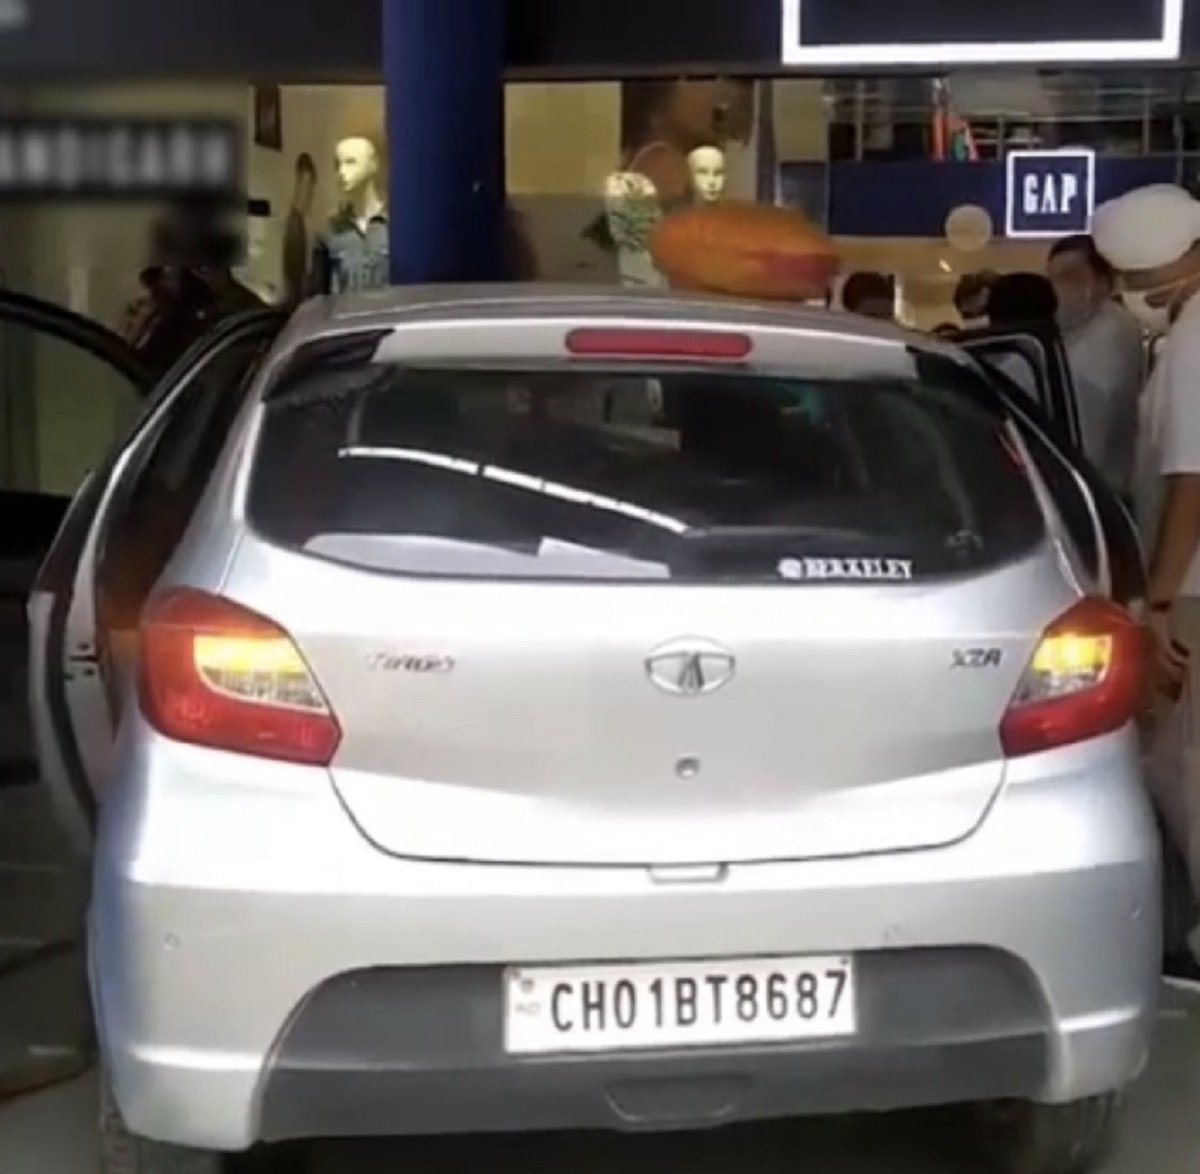 Out-of-control Tata Tiago Crashes Into A Showroom in Chandigarh, All Safe